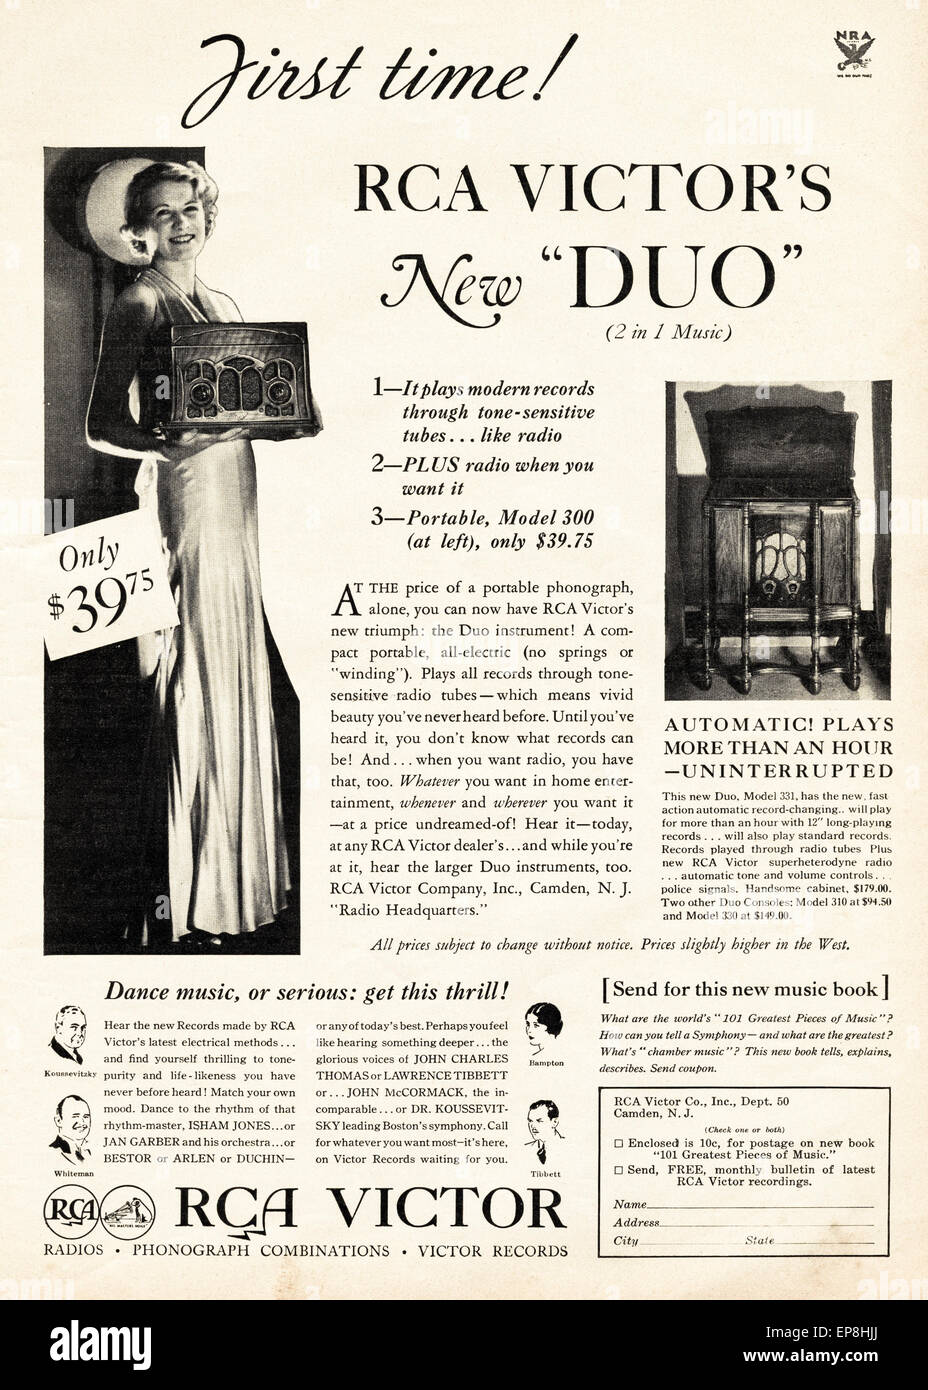 Vintage advert in 1930s American magazine dated November 1933 for RCA VICTOR radio Stock Photo